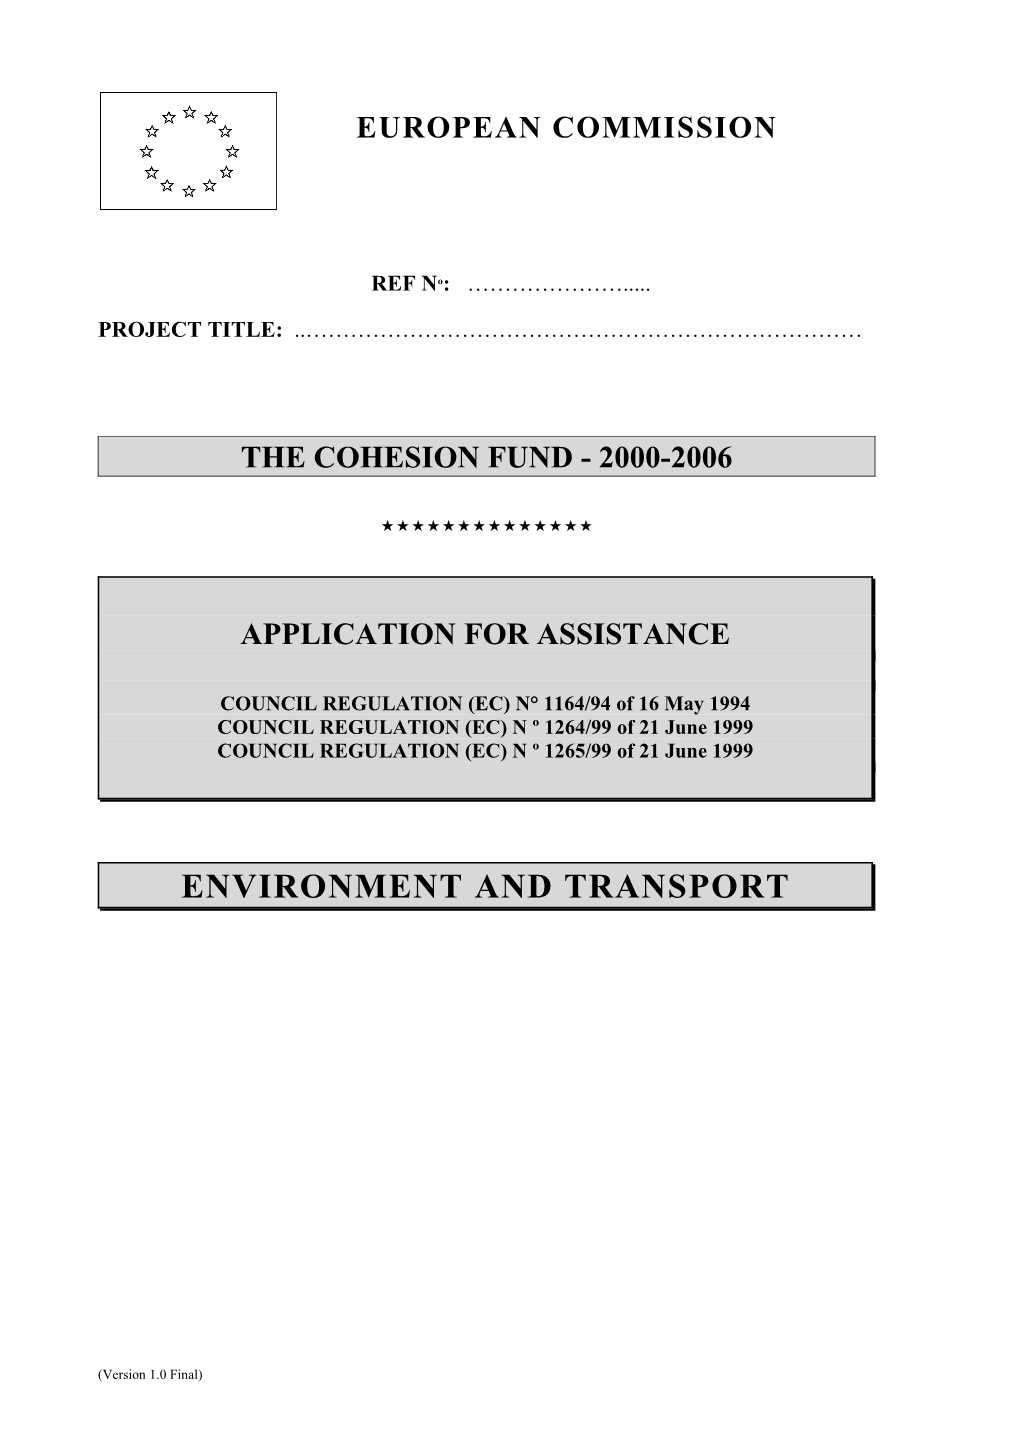 The Cohesion Fund - 2000-2006